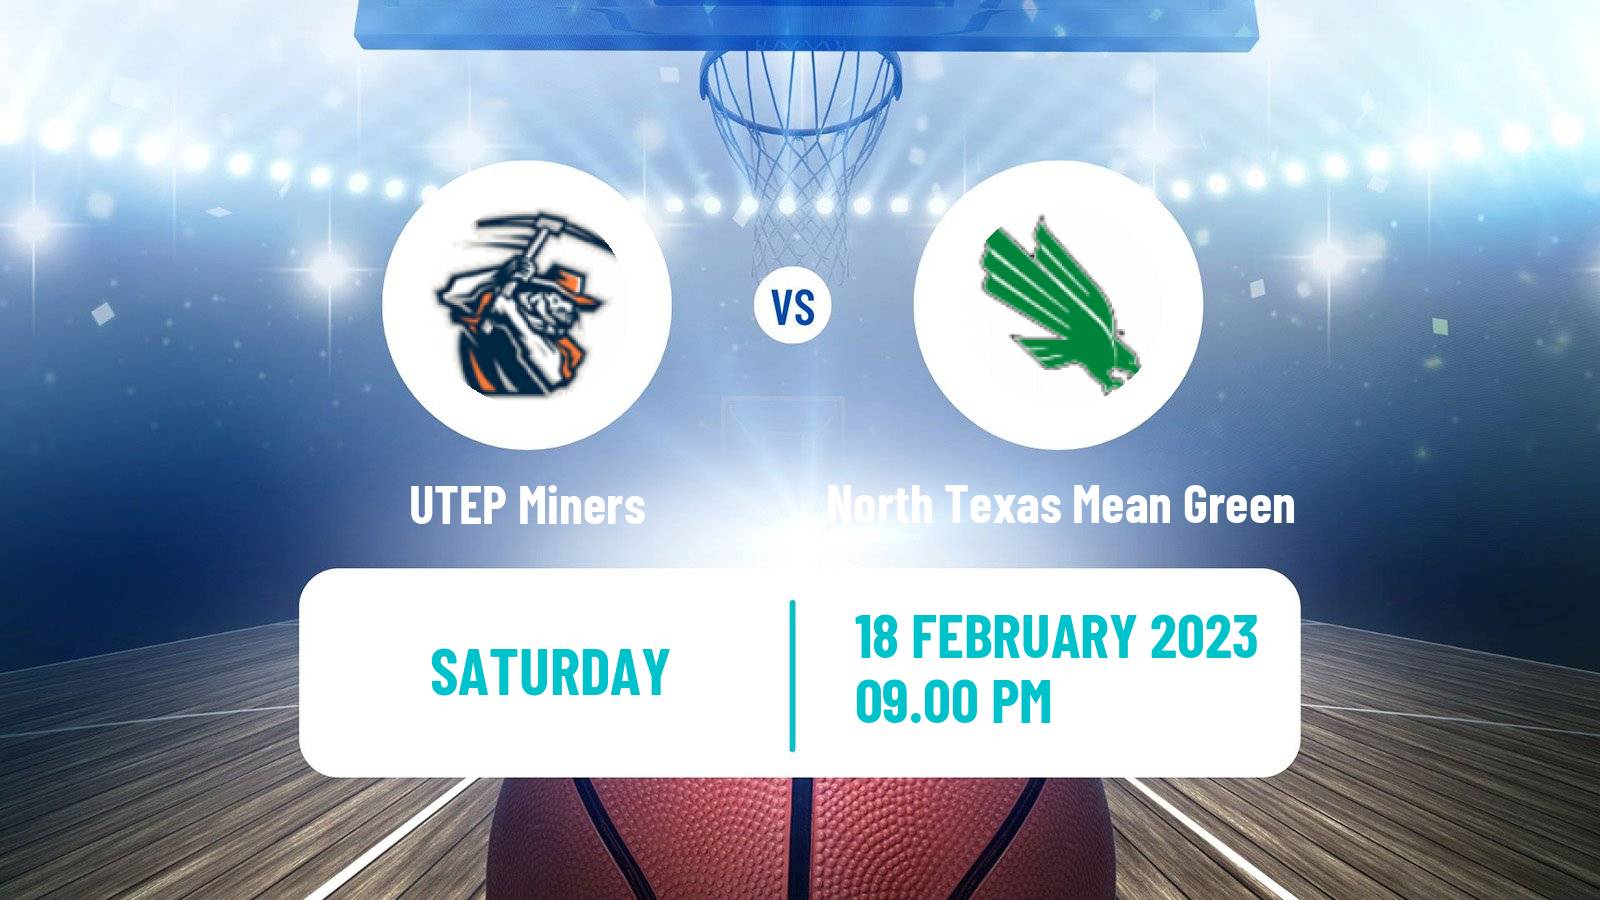 Basketball NCAA College Basketball UTEP Miners - North Texas Mean Green